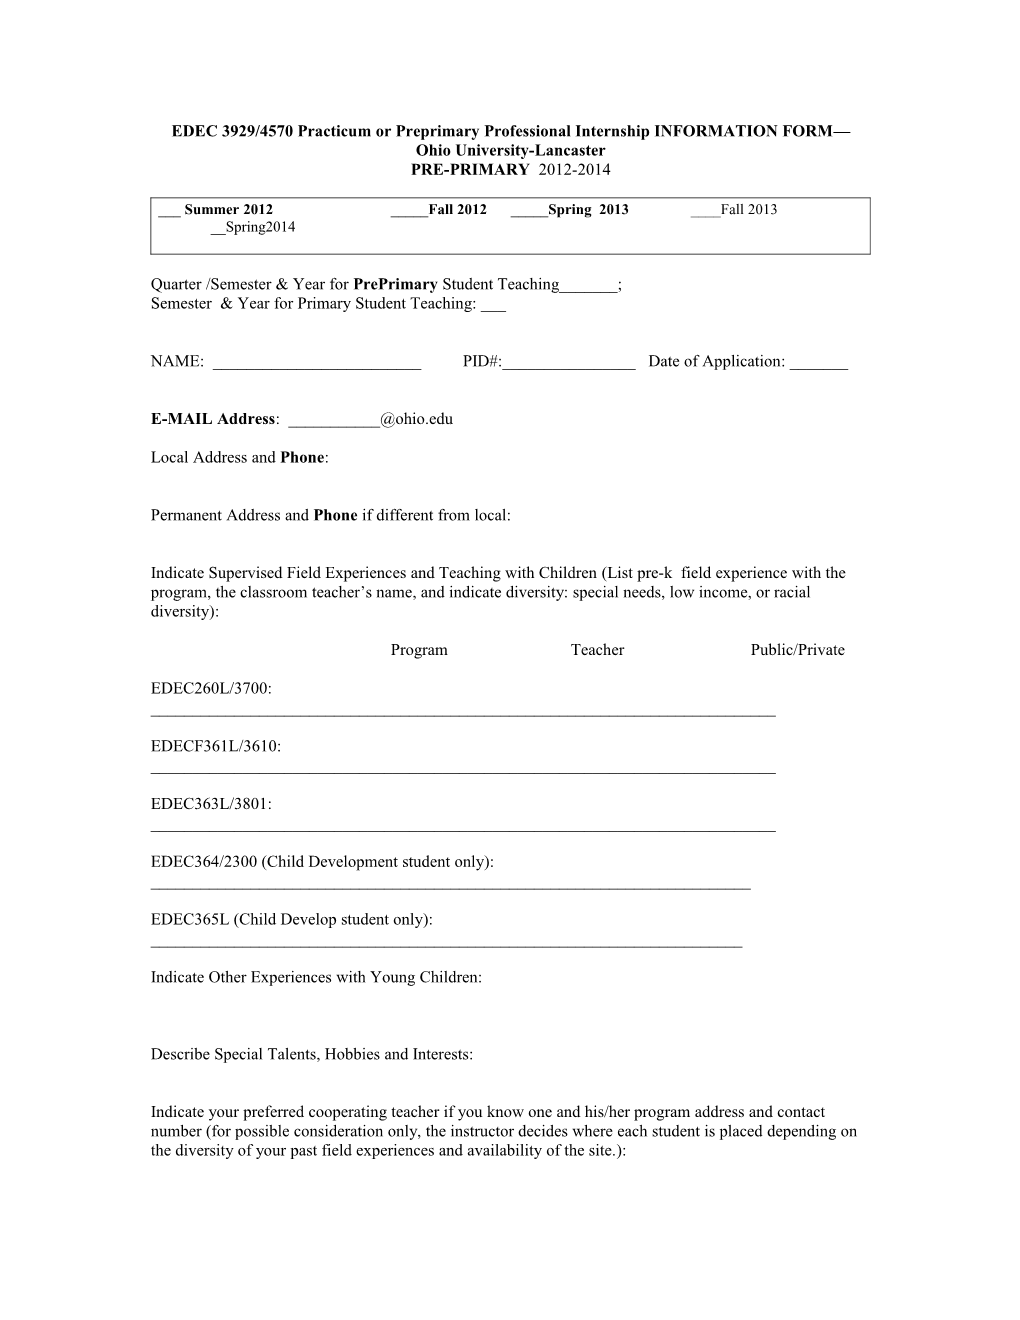 Student Teaching Information Form